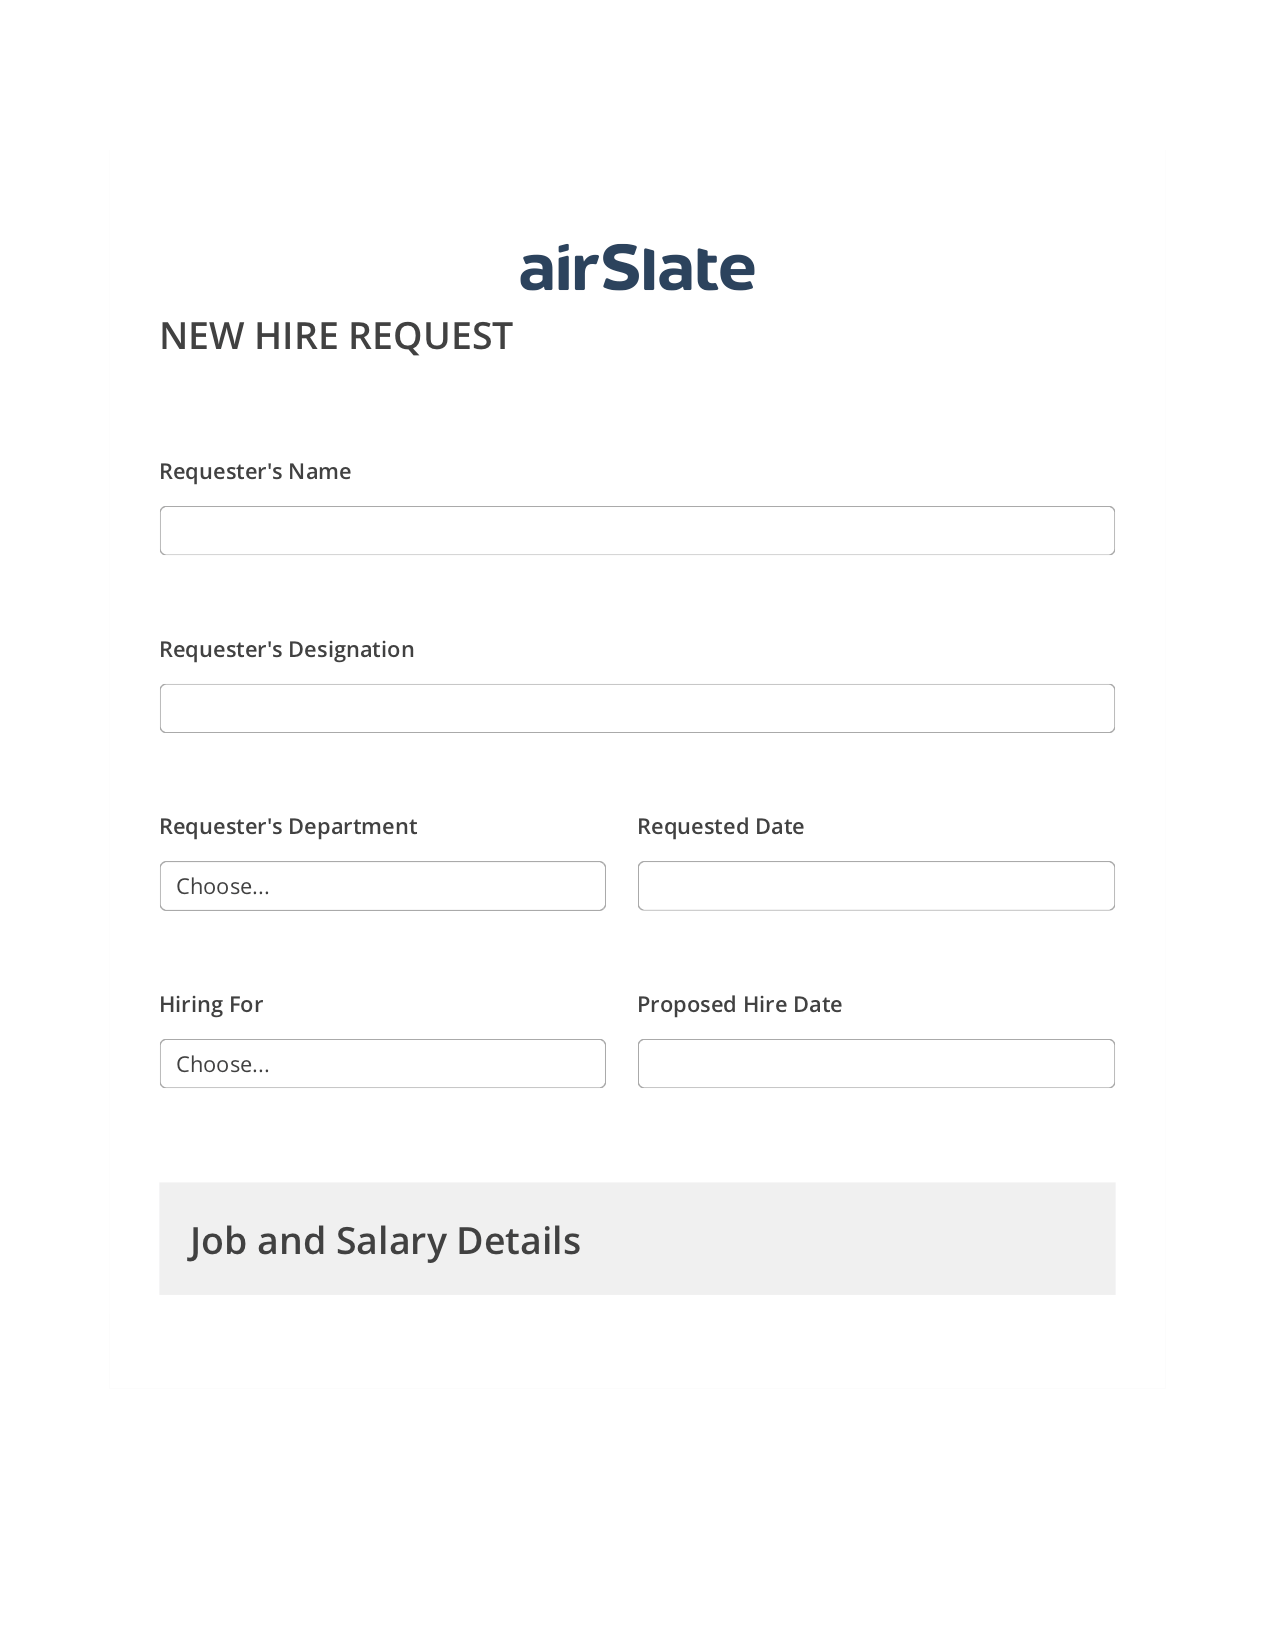 Hiring Request Workflow Pre-fill from Salesforce Records with SOQL Bot, Create QuickBooks Invoice Bot, Post-finish Document Bot